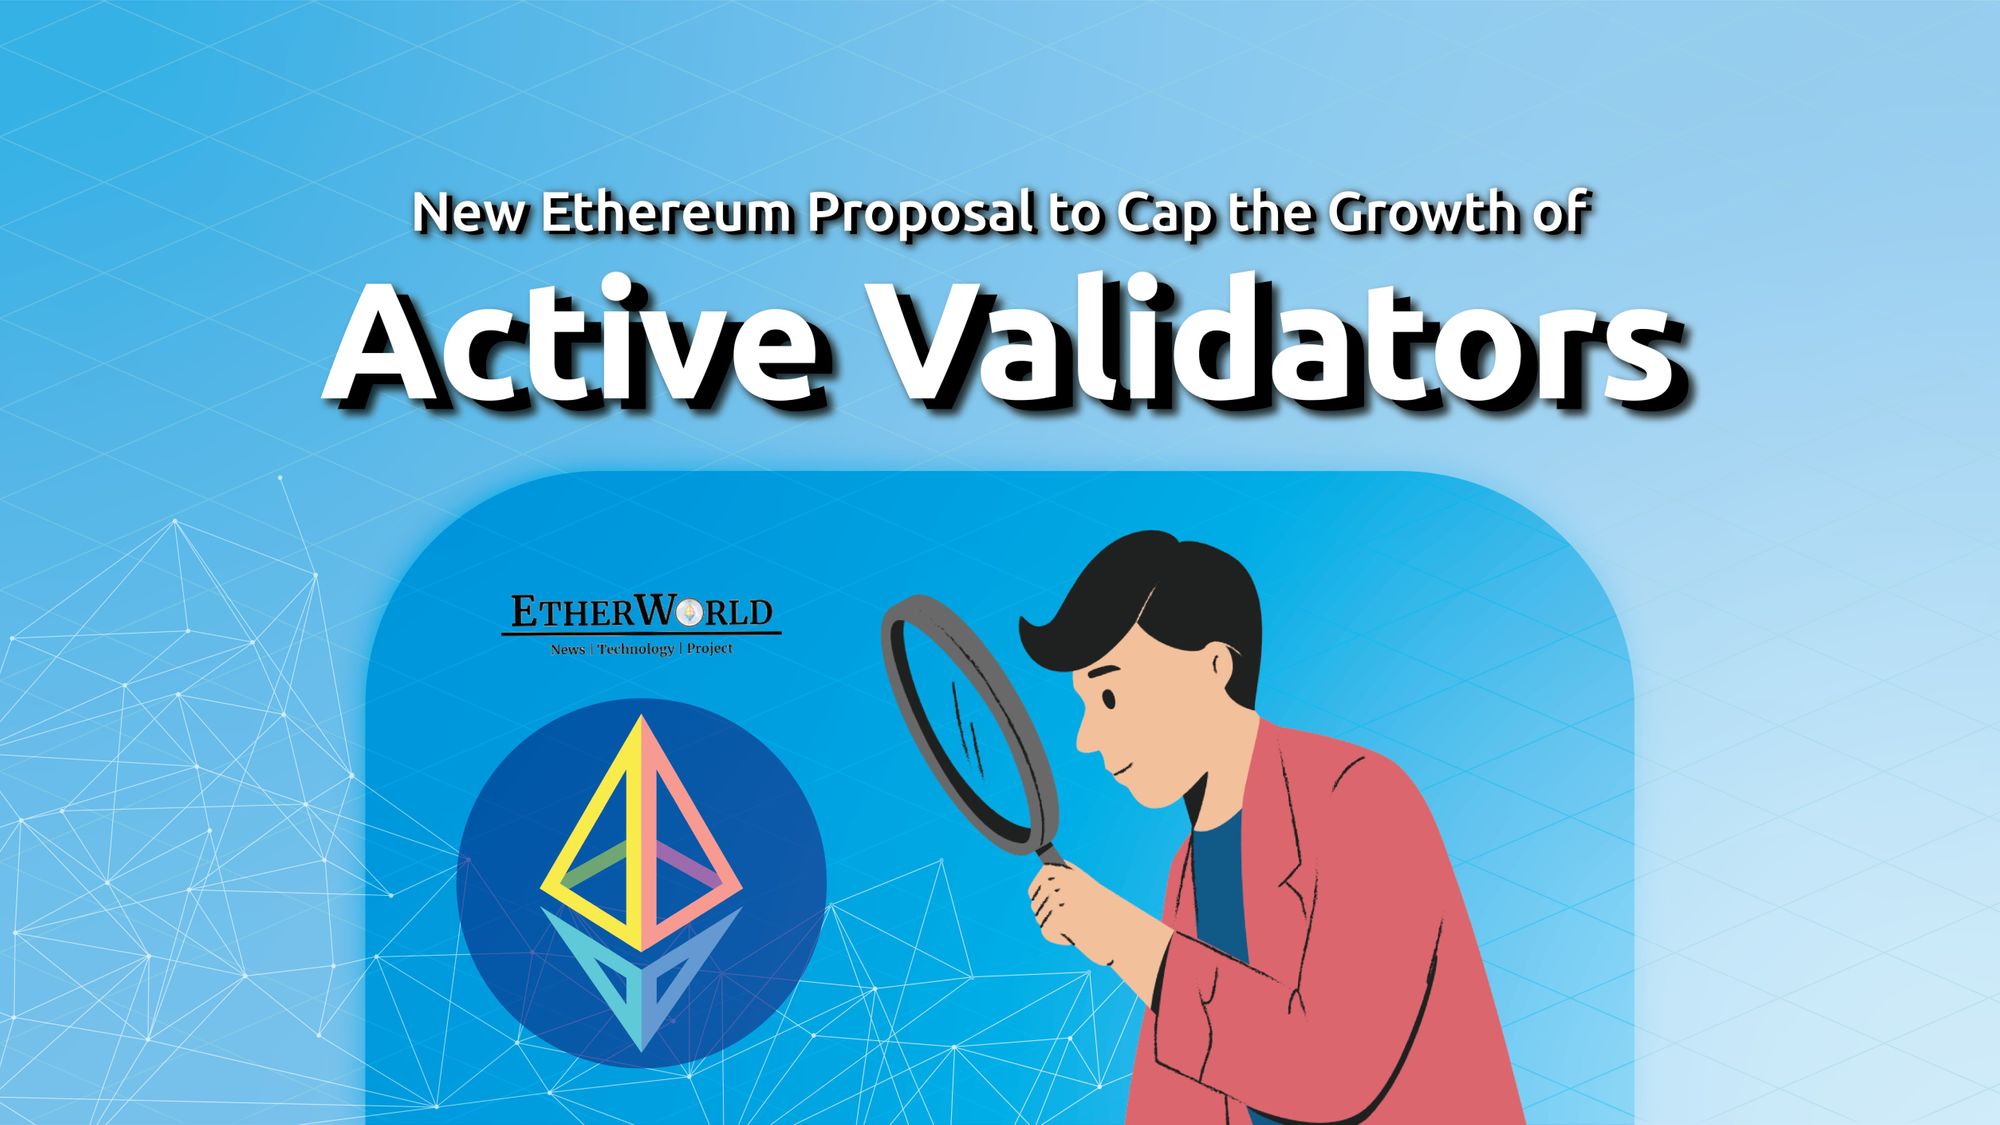 New Ethereum Proposal to Cap the Growth of Active Validators